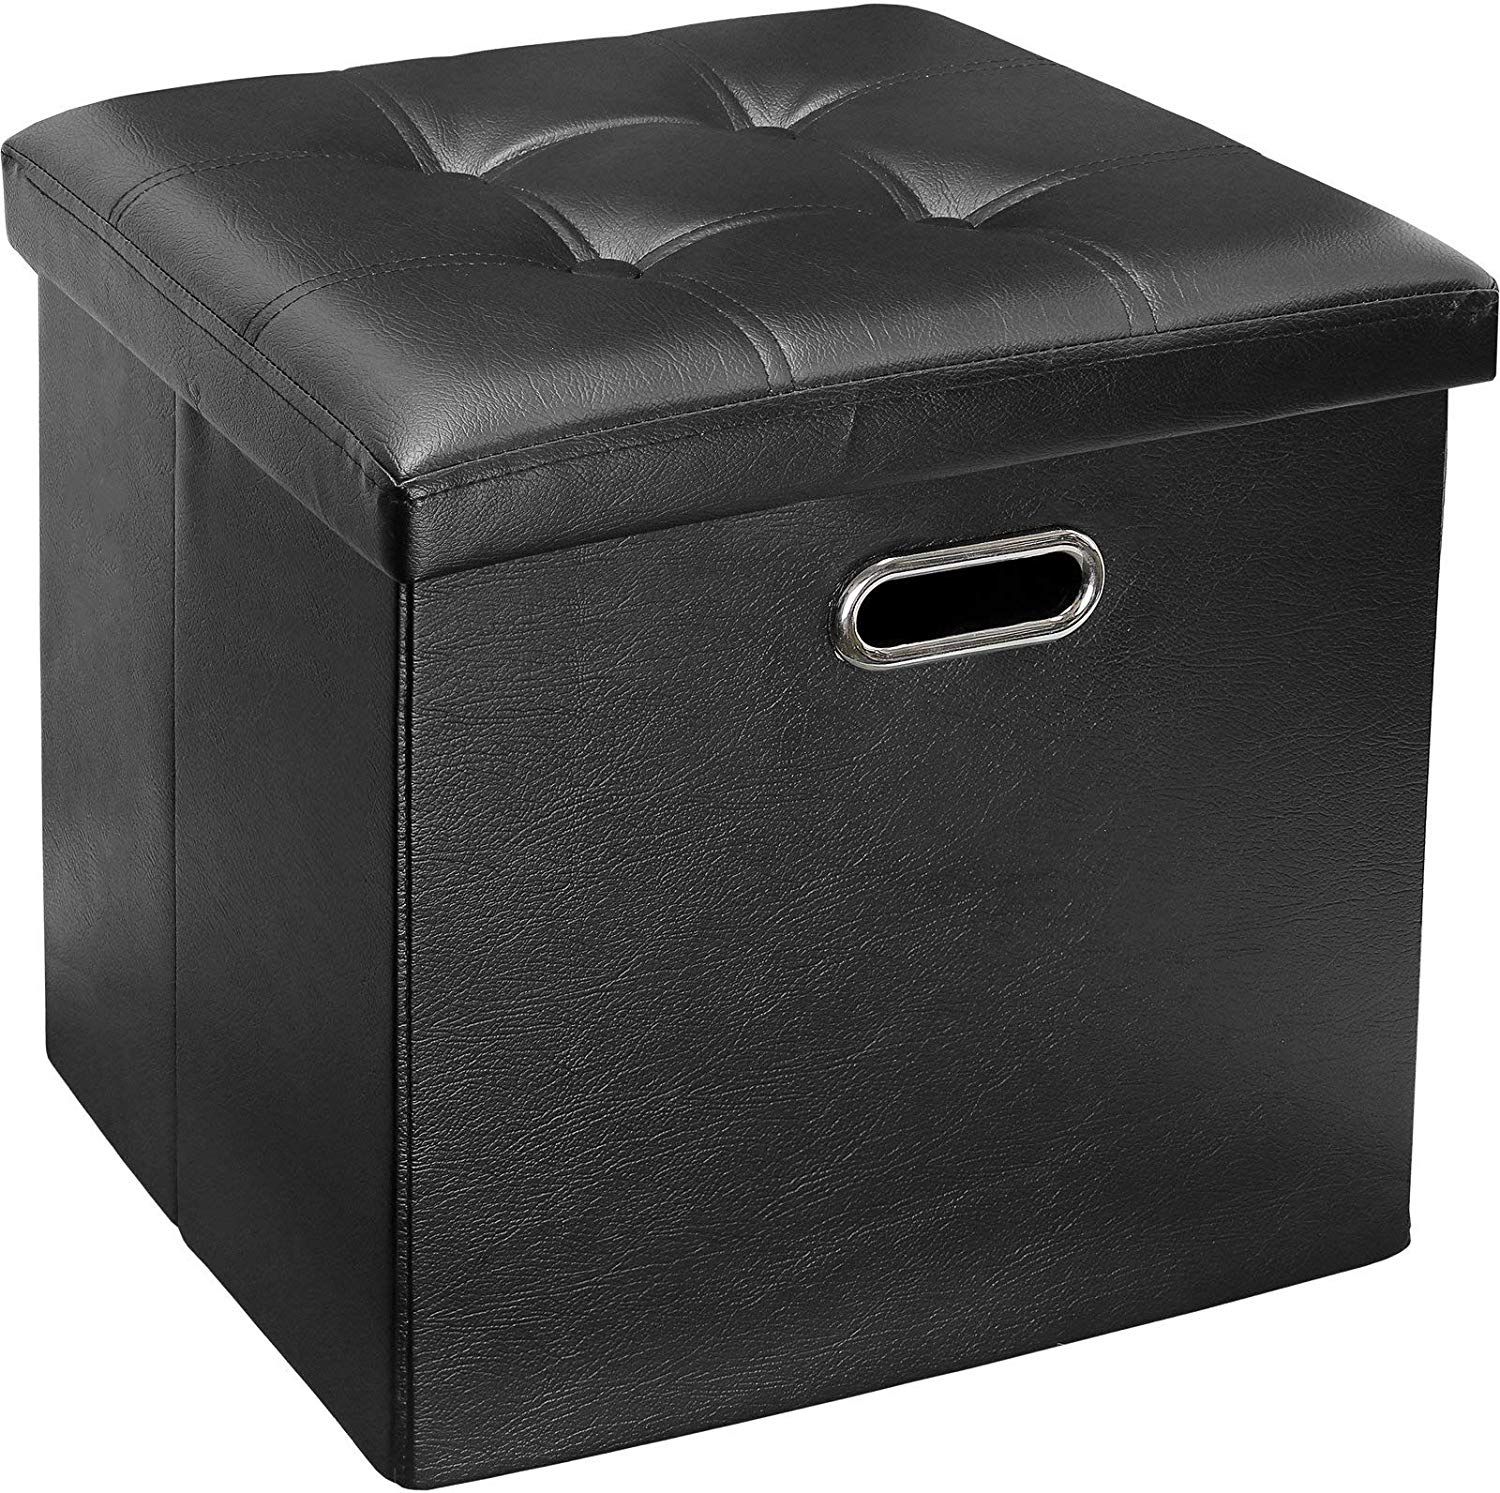 Faux Leather, Tufted, Ottoman Stool Seat And Foot Rest, Collapsible Throughout Black Faux Leather Storage Ottomans (View 5 of 20)